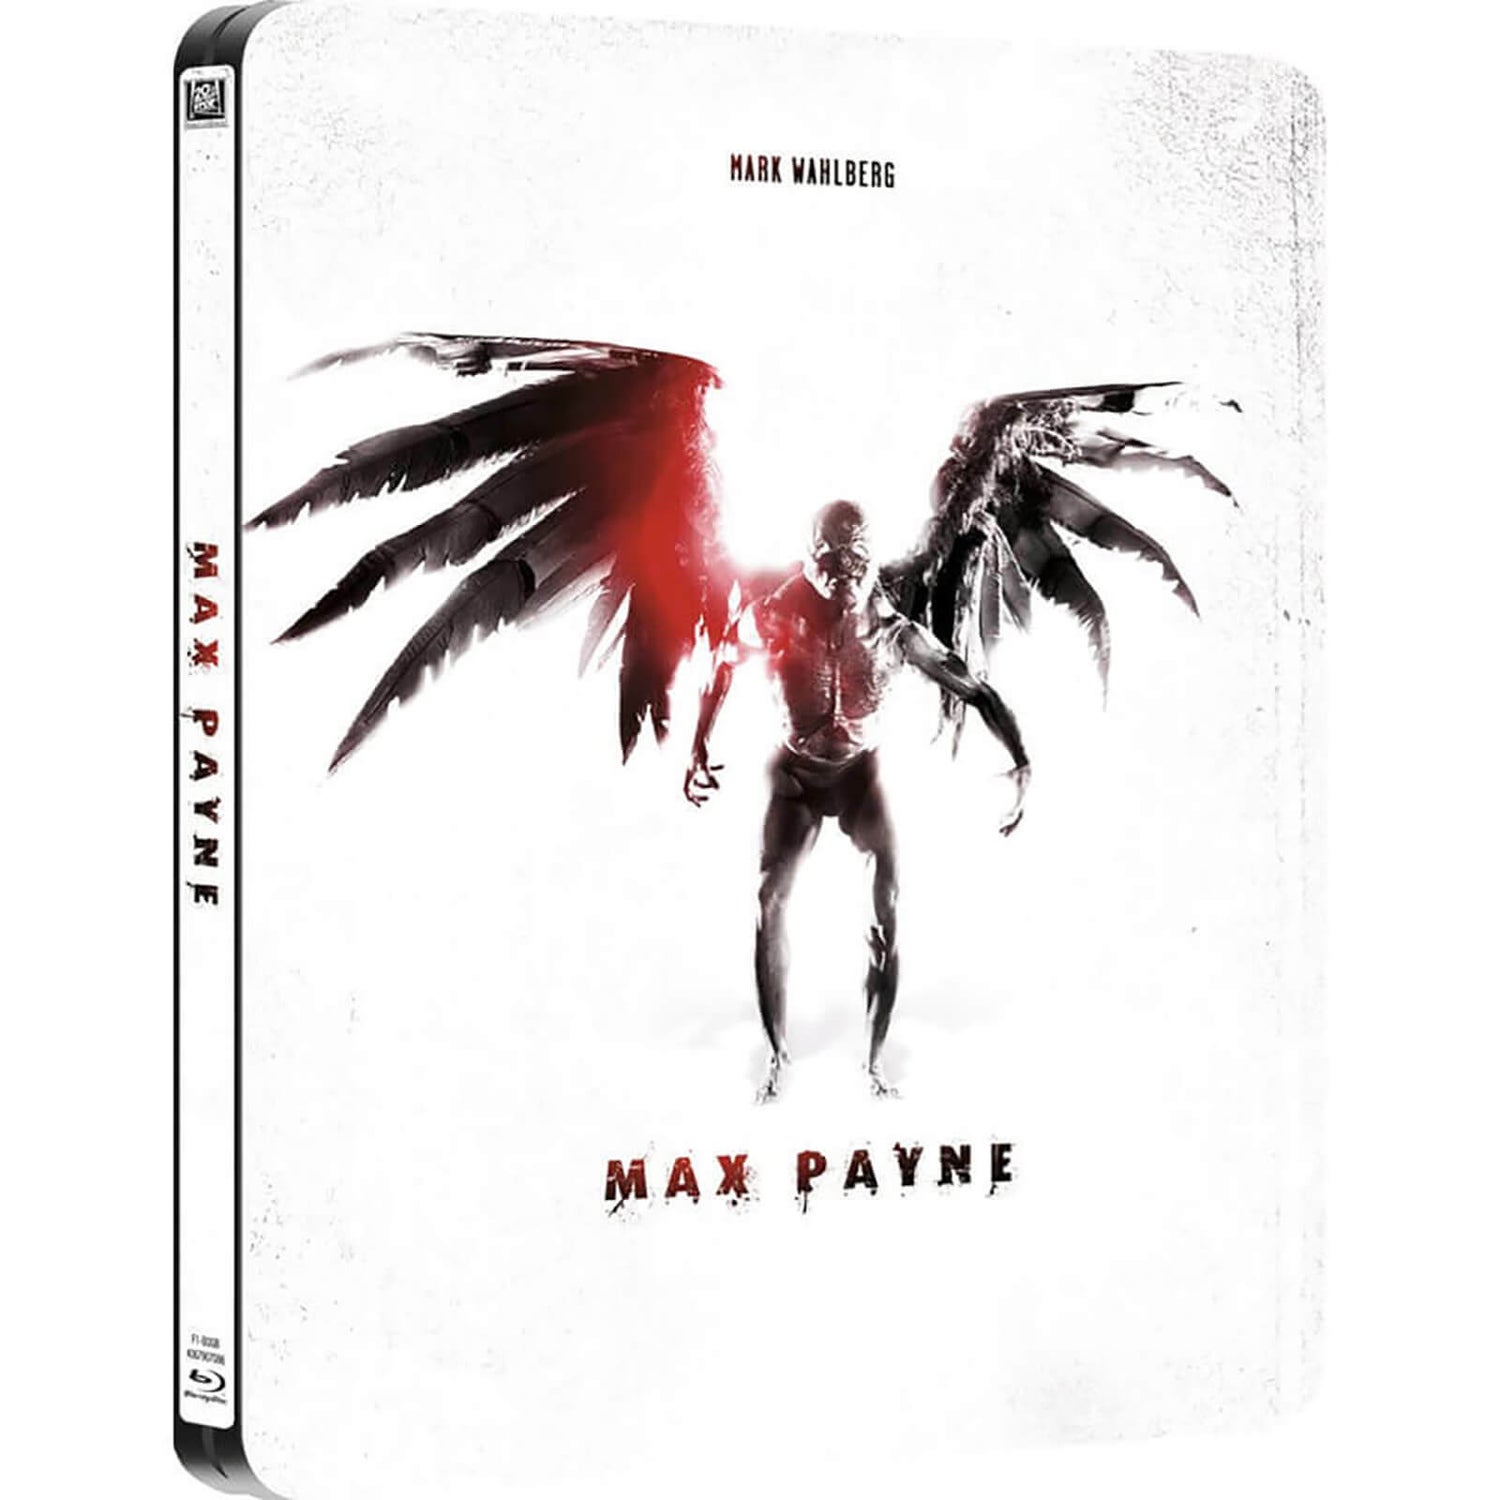 Max Payne - Zavvi UK Exclusive Limited Edition Steelbook (Limited to 2000 Copies)